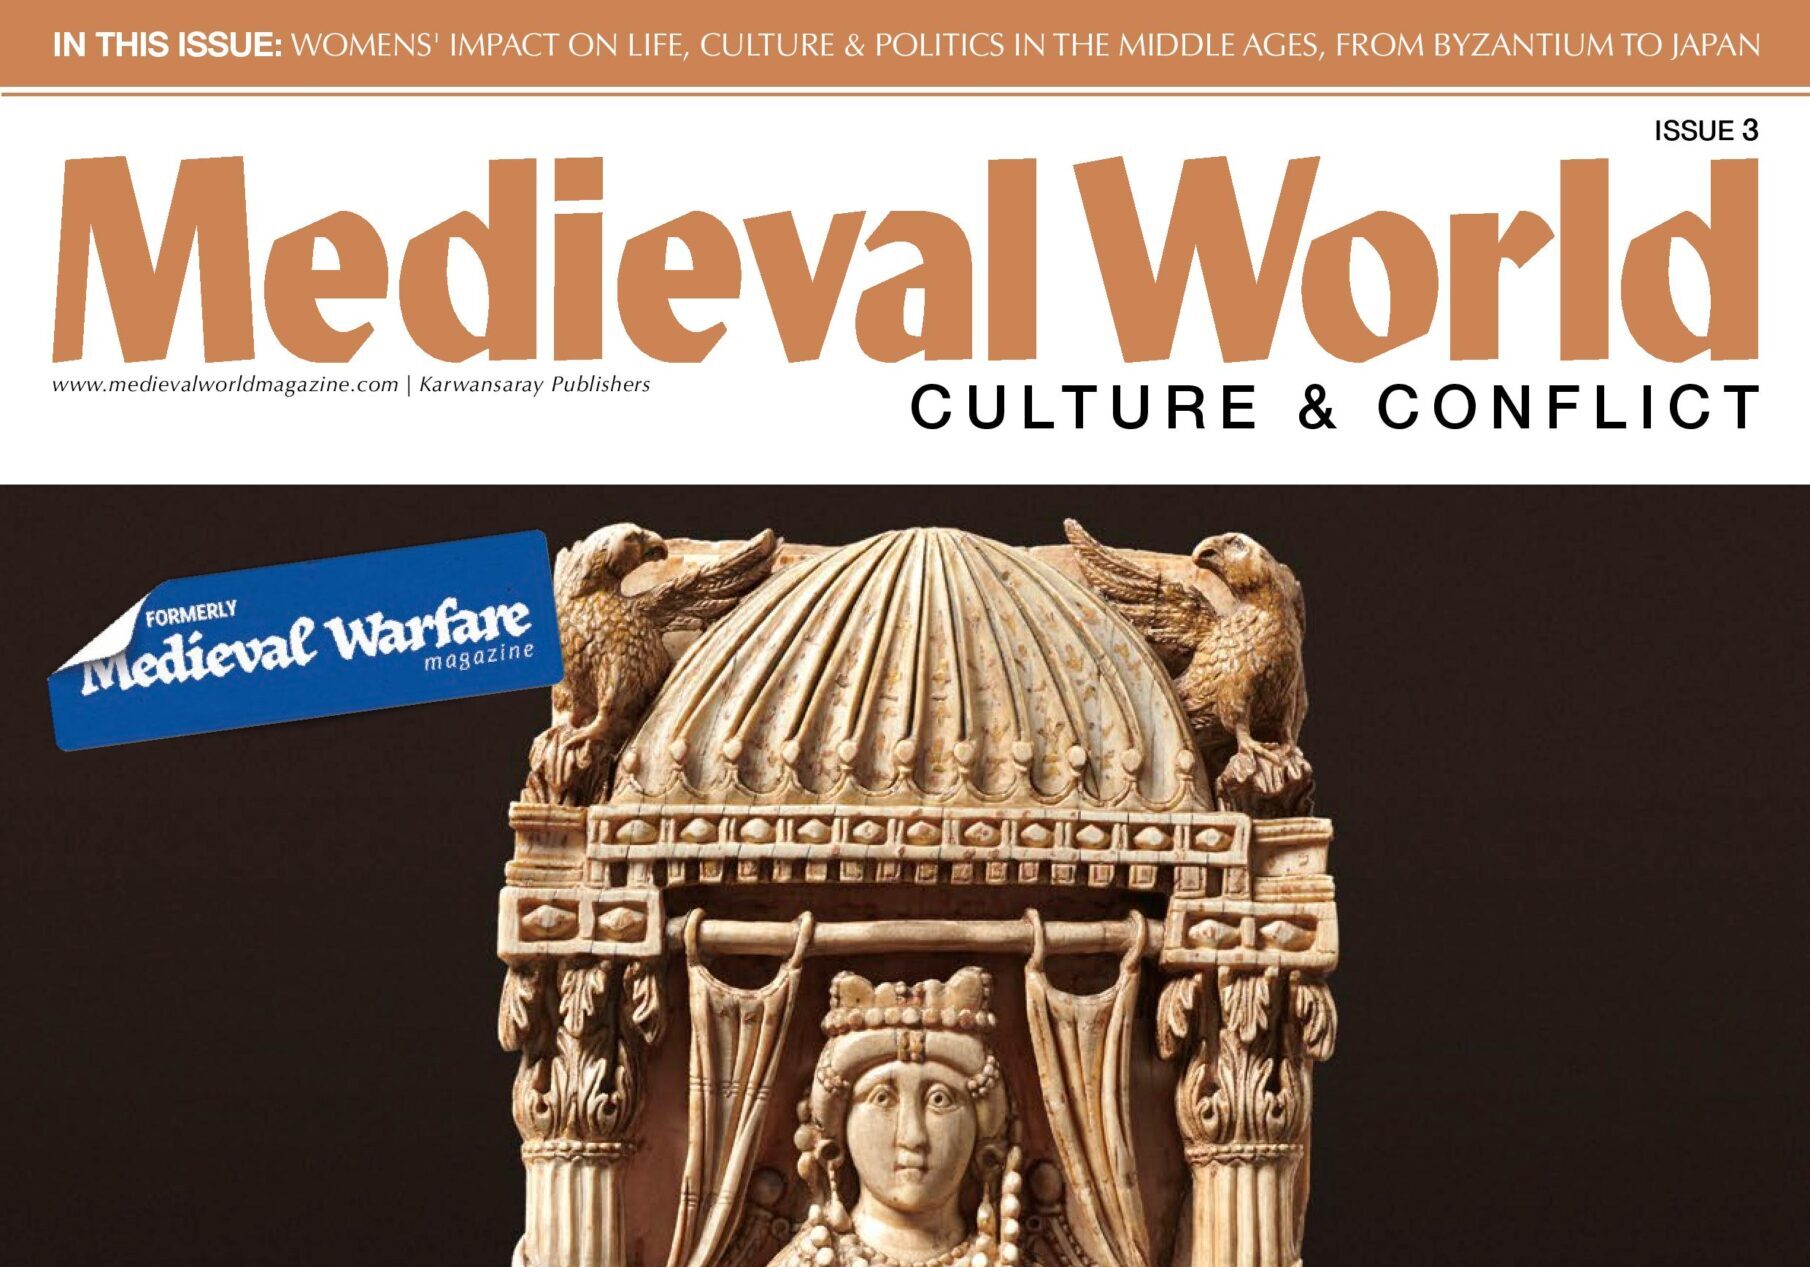 New issue of Medieval World focuses on Women in Charge